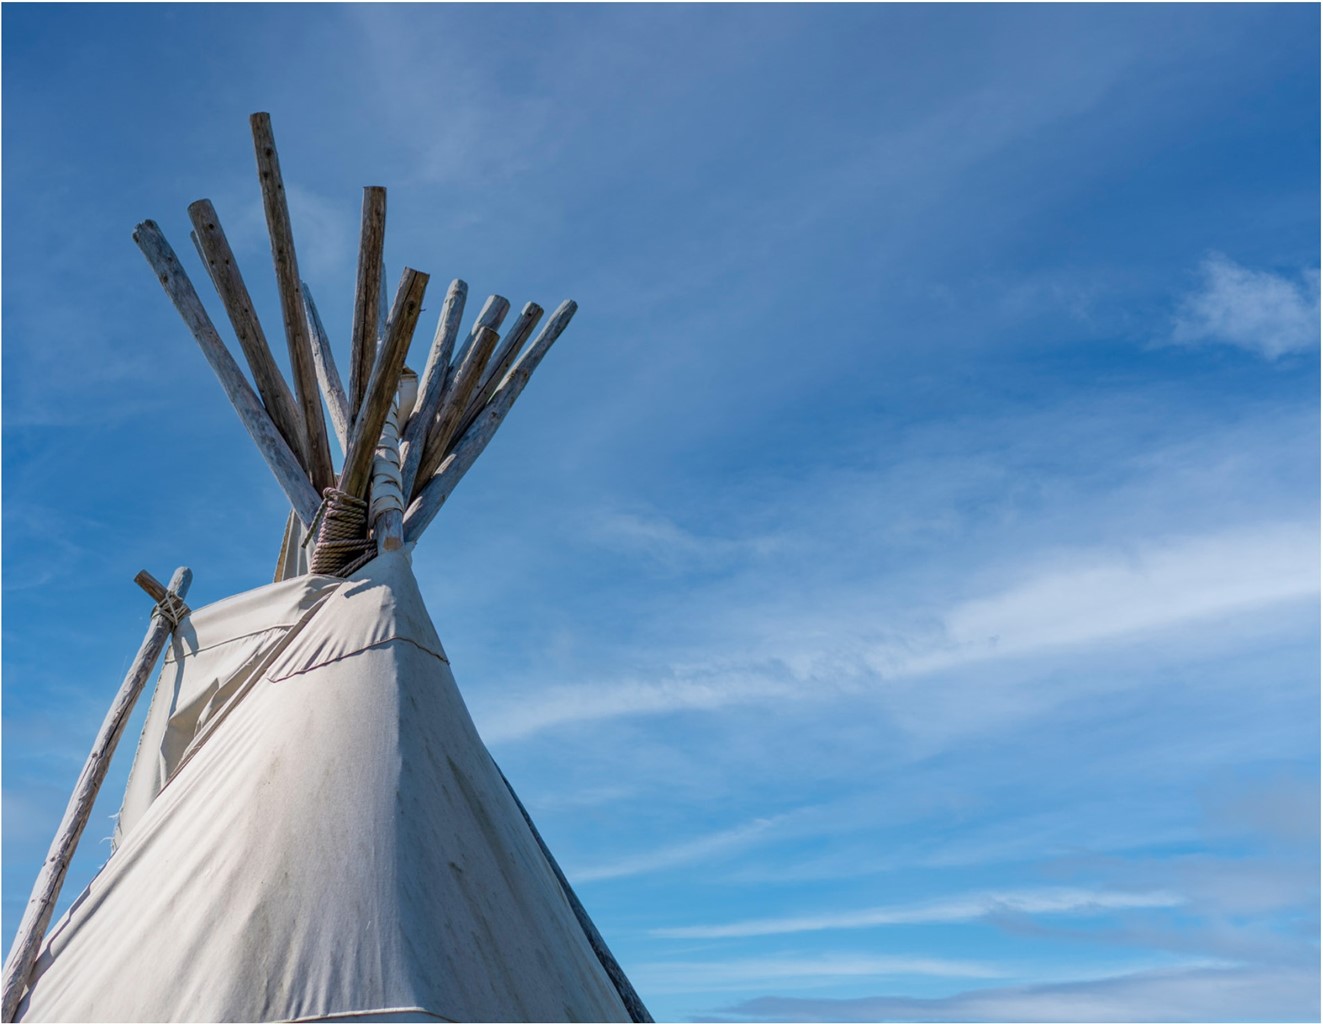 Top of Tipi with blue sky